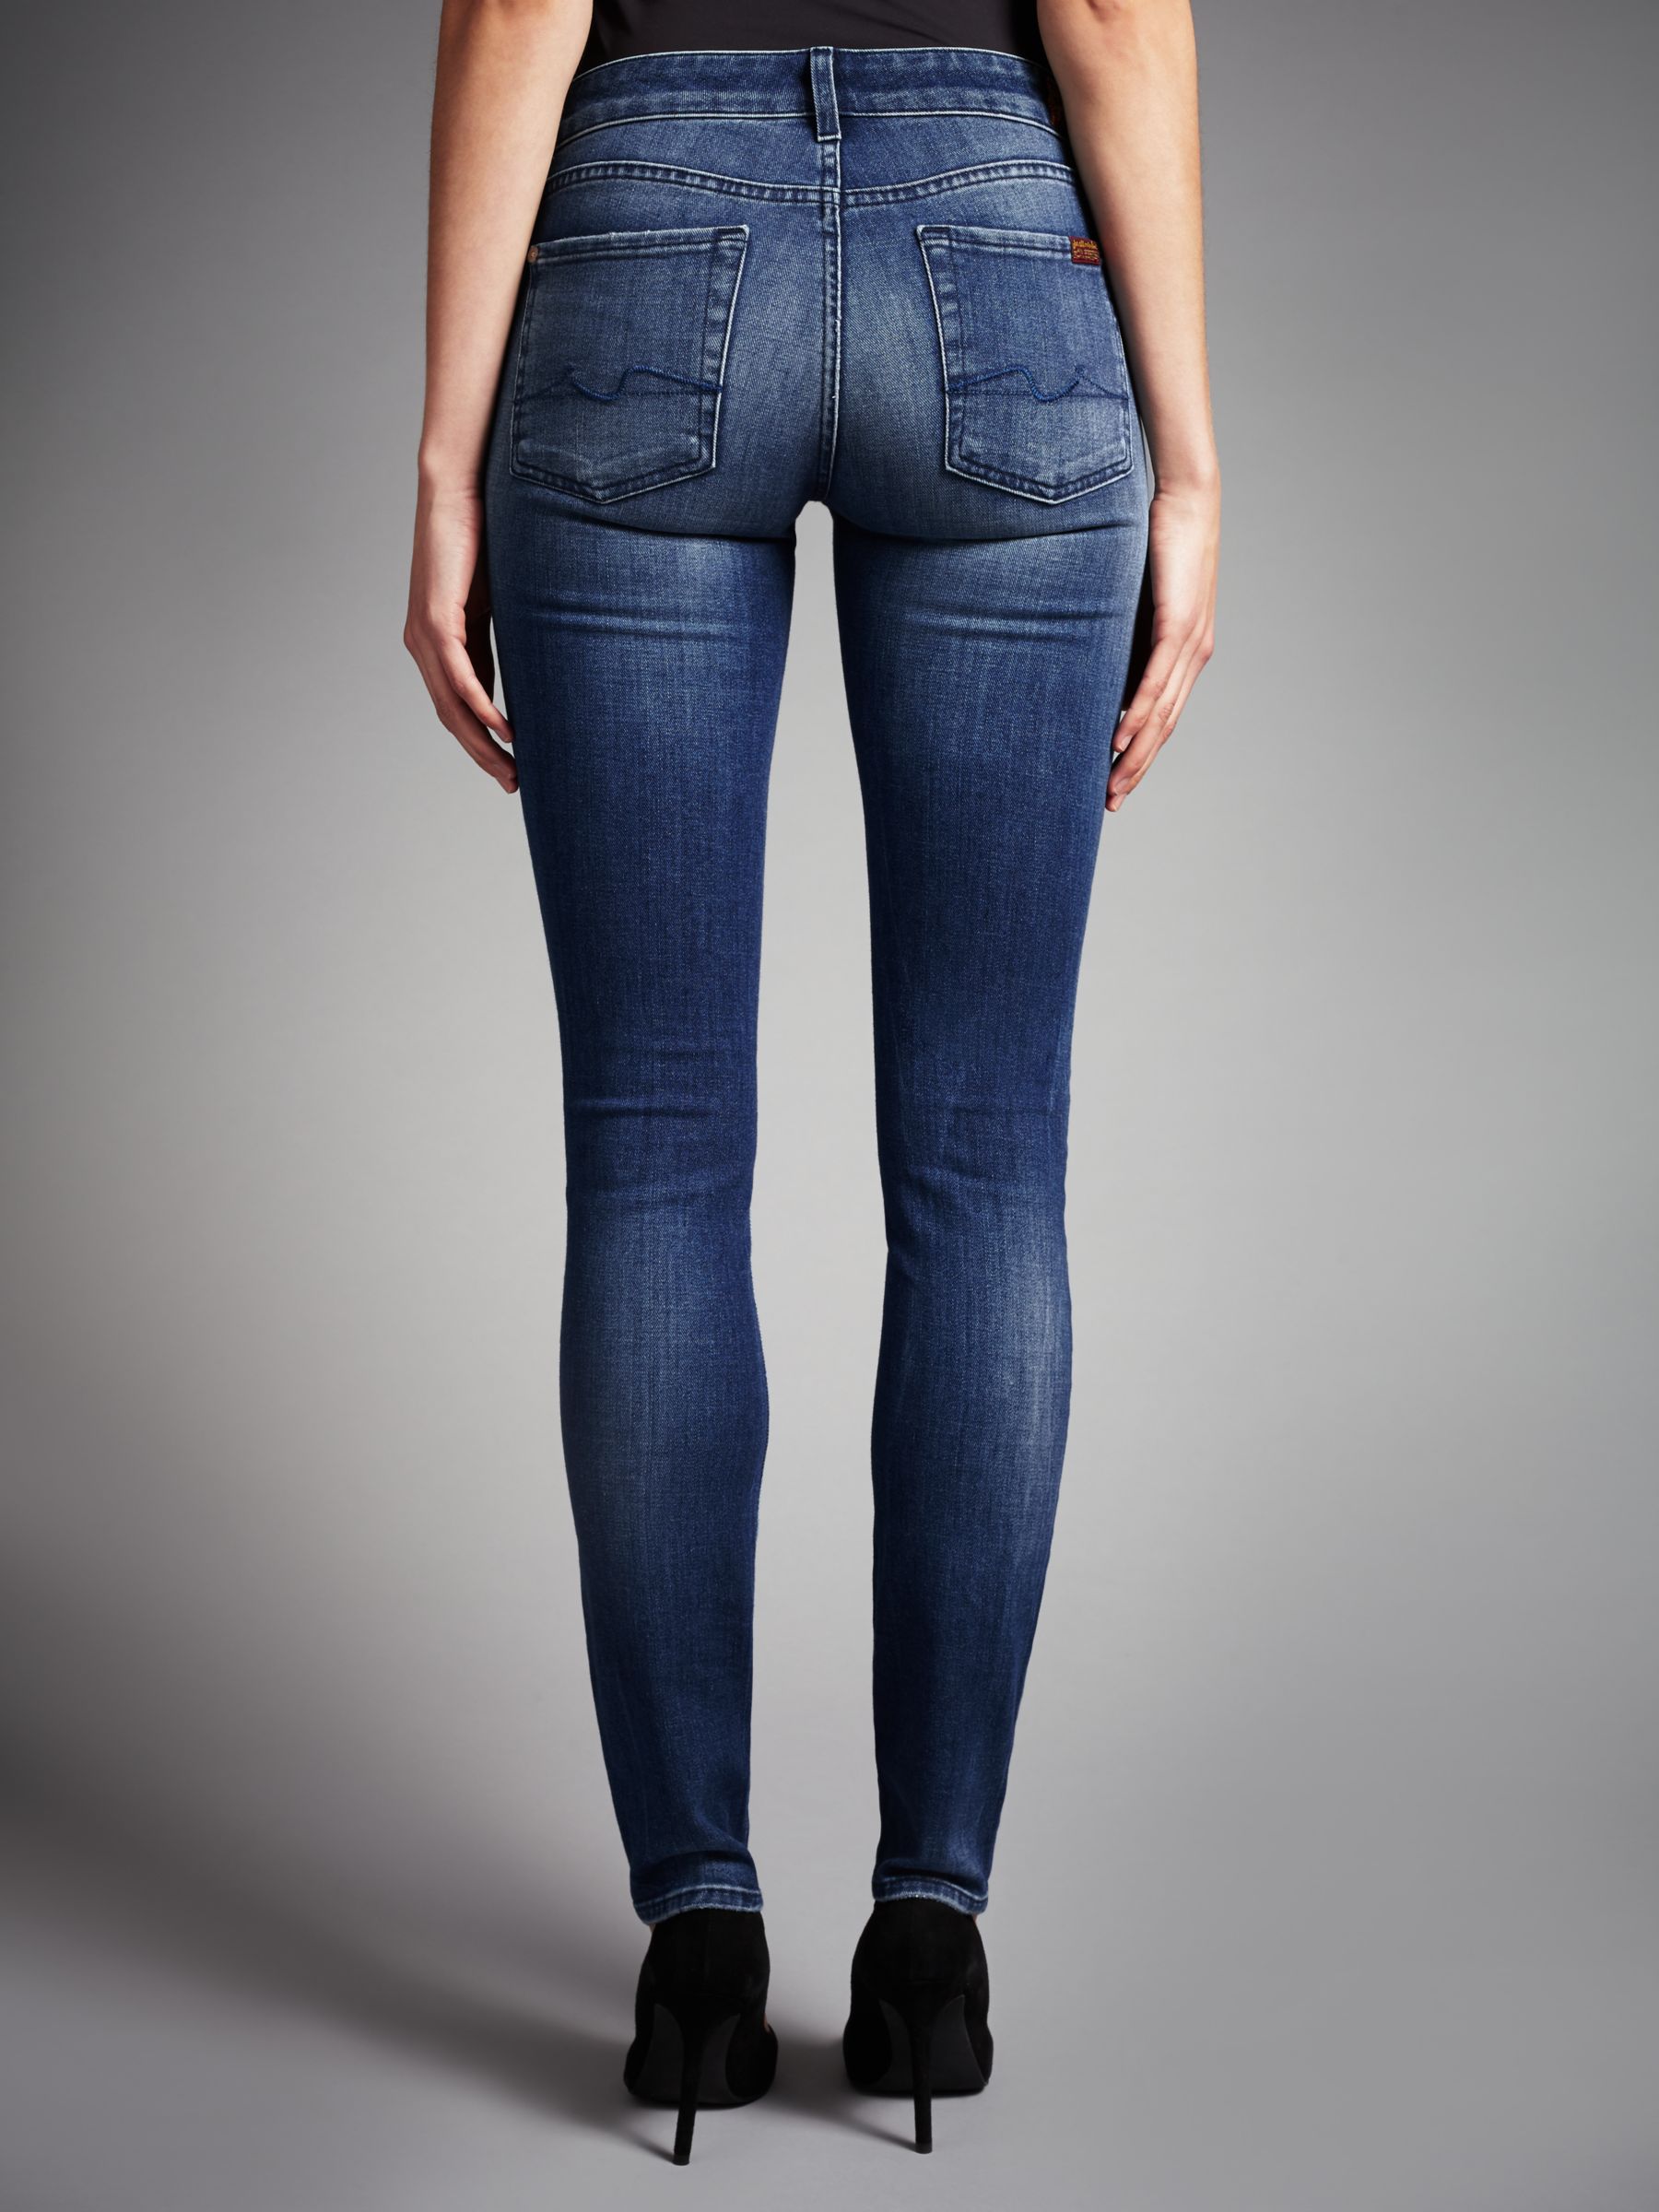 7 For All Mankind Cristen Mid Rise Skinny Jeans Left Hand Dark At John Lewis Partners